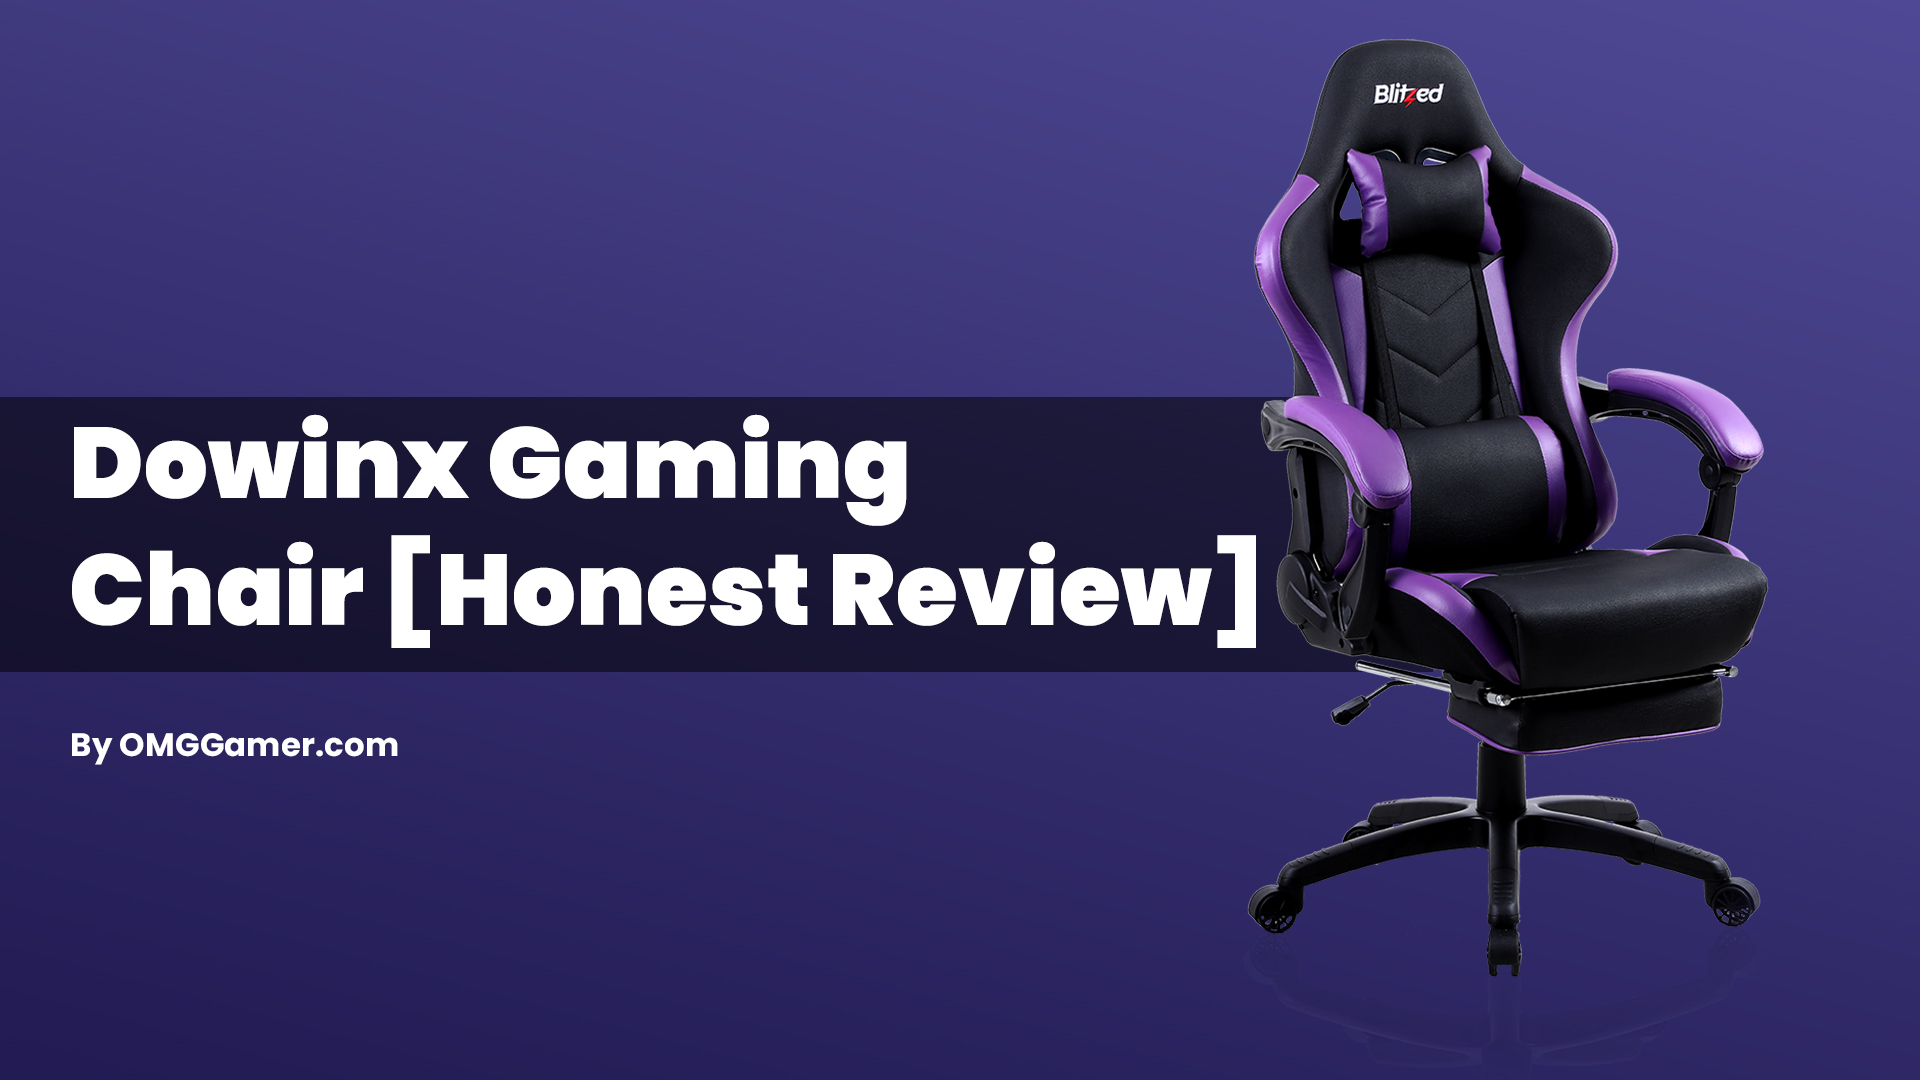 Dowinx Gaming Chair: Is It Worth it? [Honest Review]